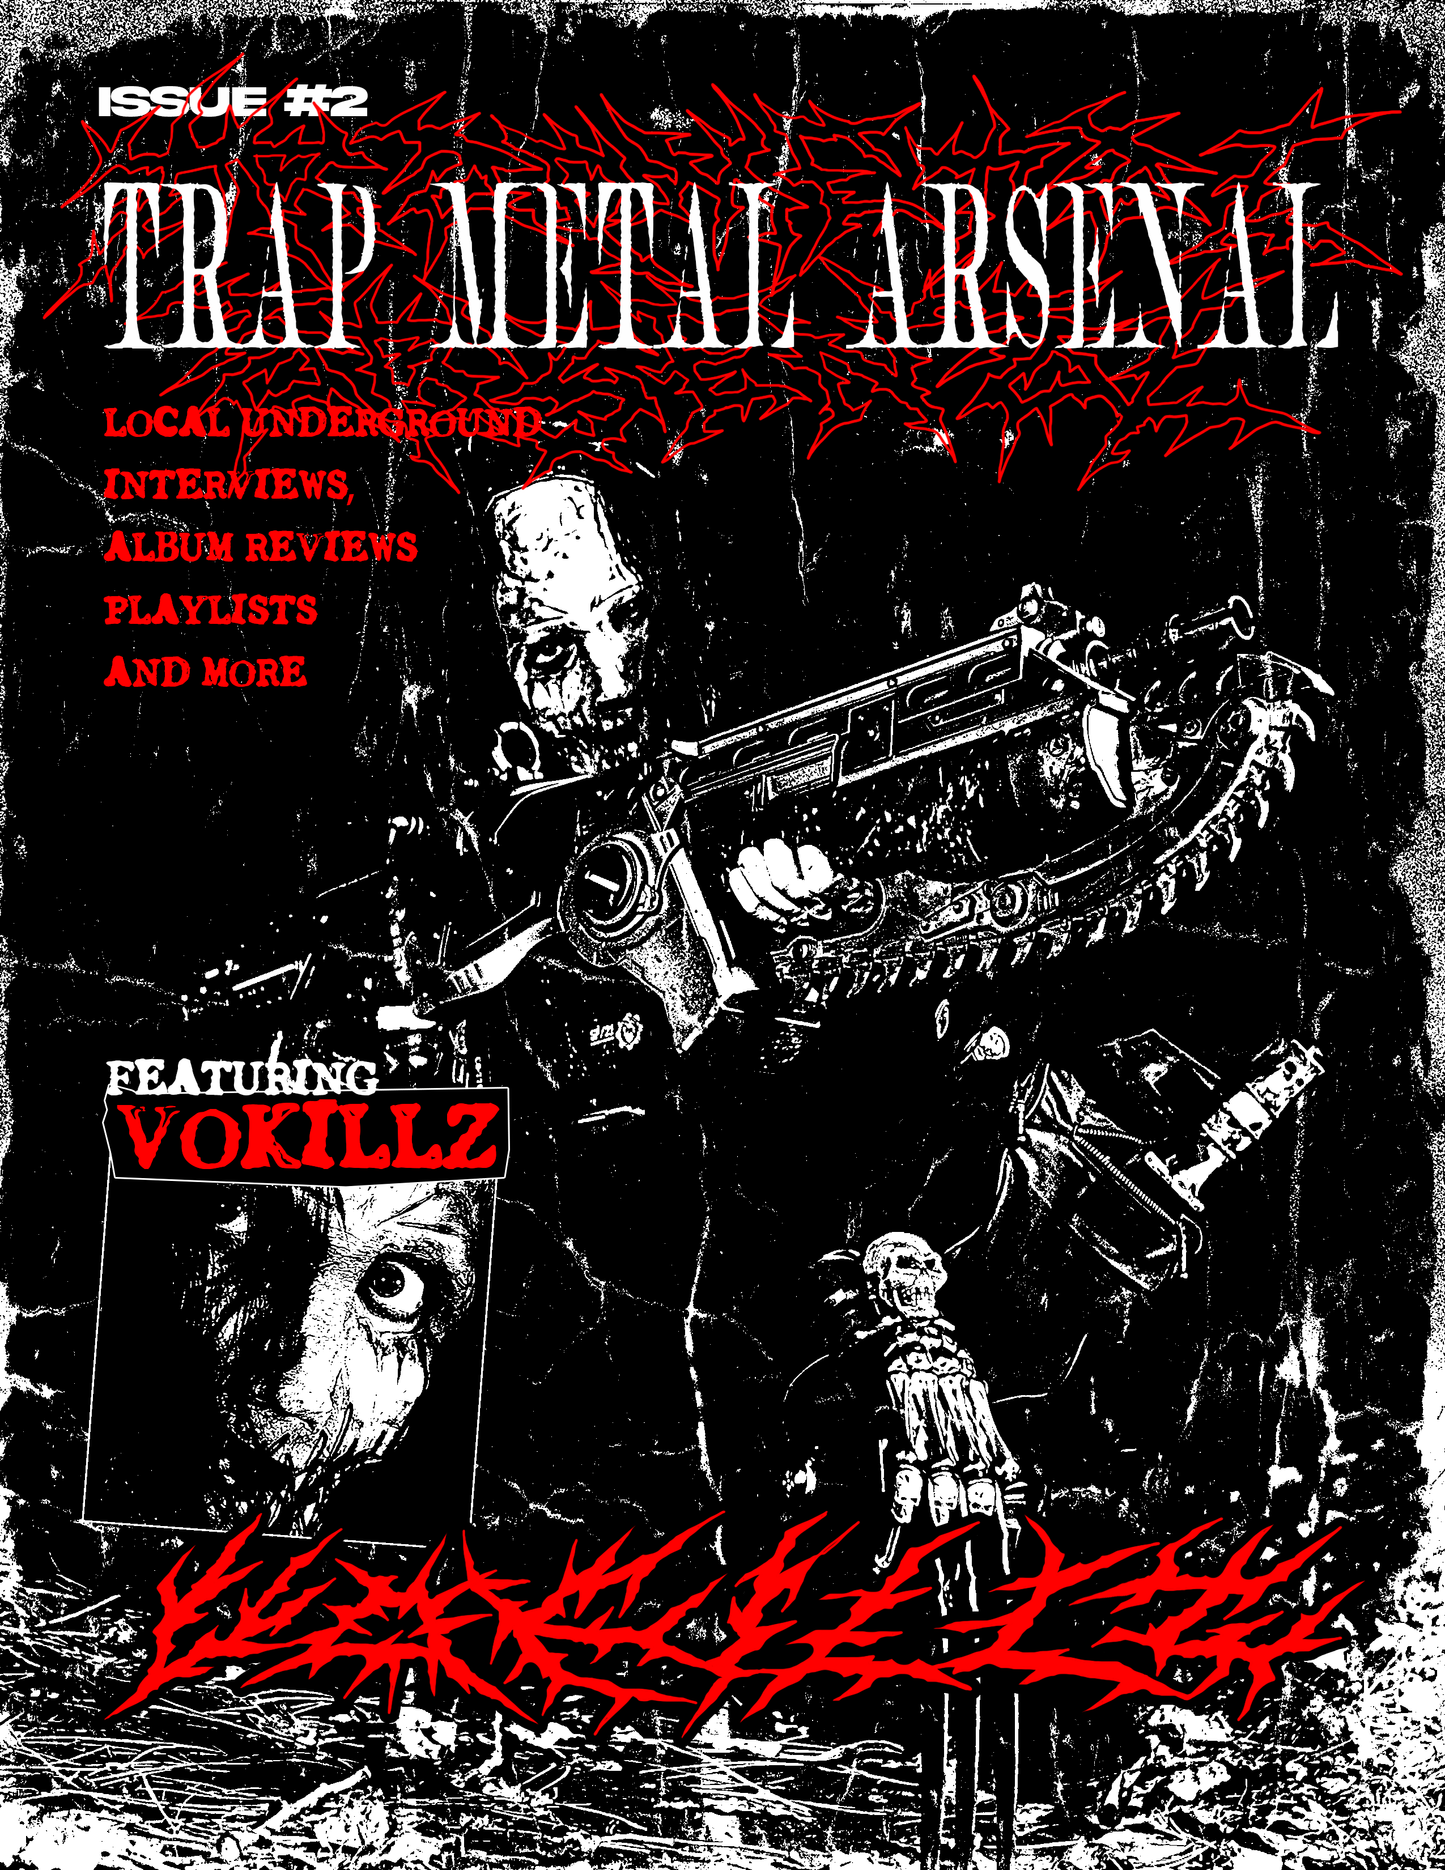 Trap Metal Arsenal #2 VOKILLZ (MADE TO ORDER)